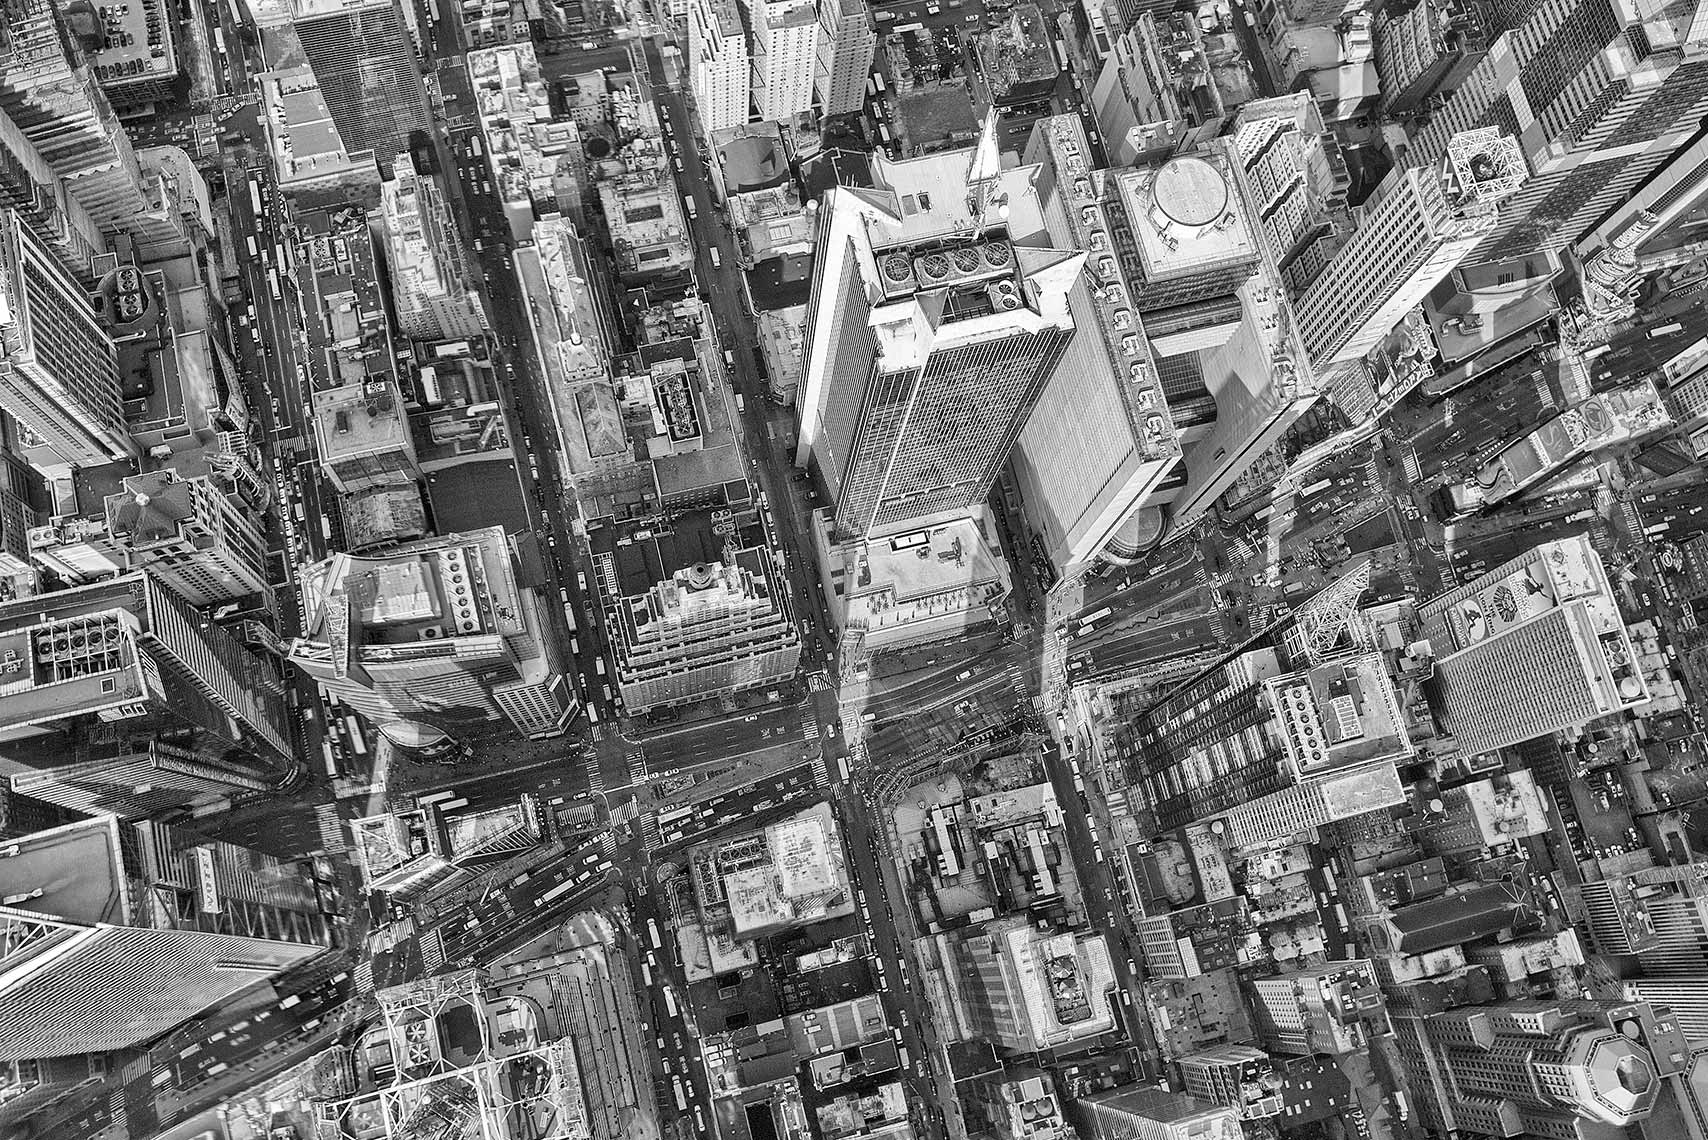 Zoe Wetherall / Aerial Cityscape / Times Square